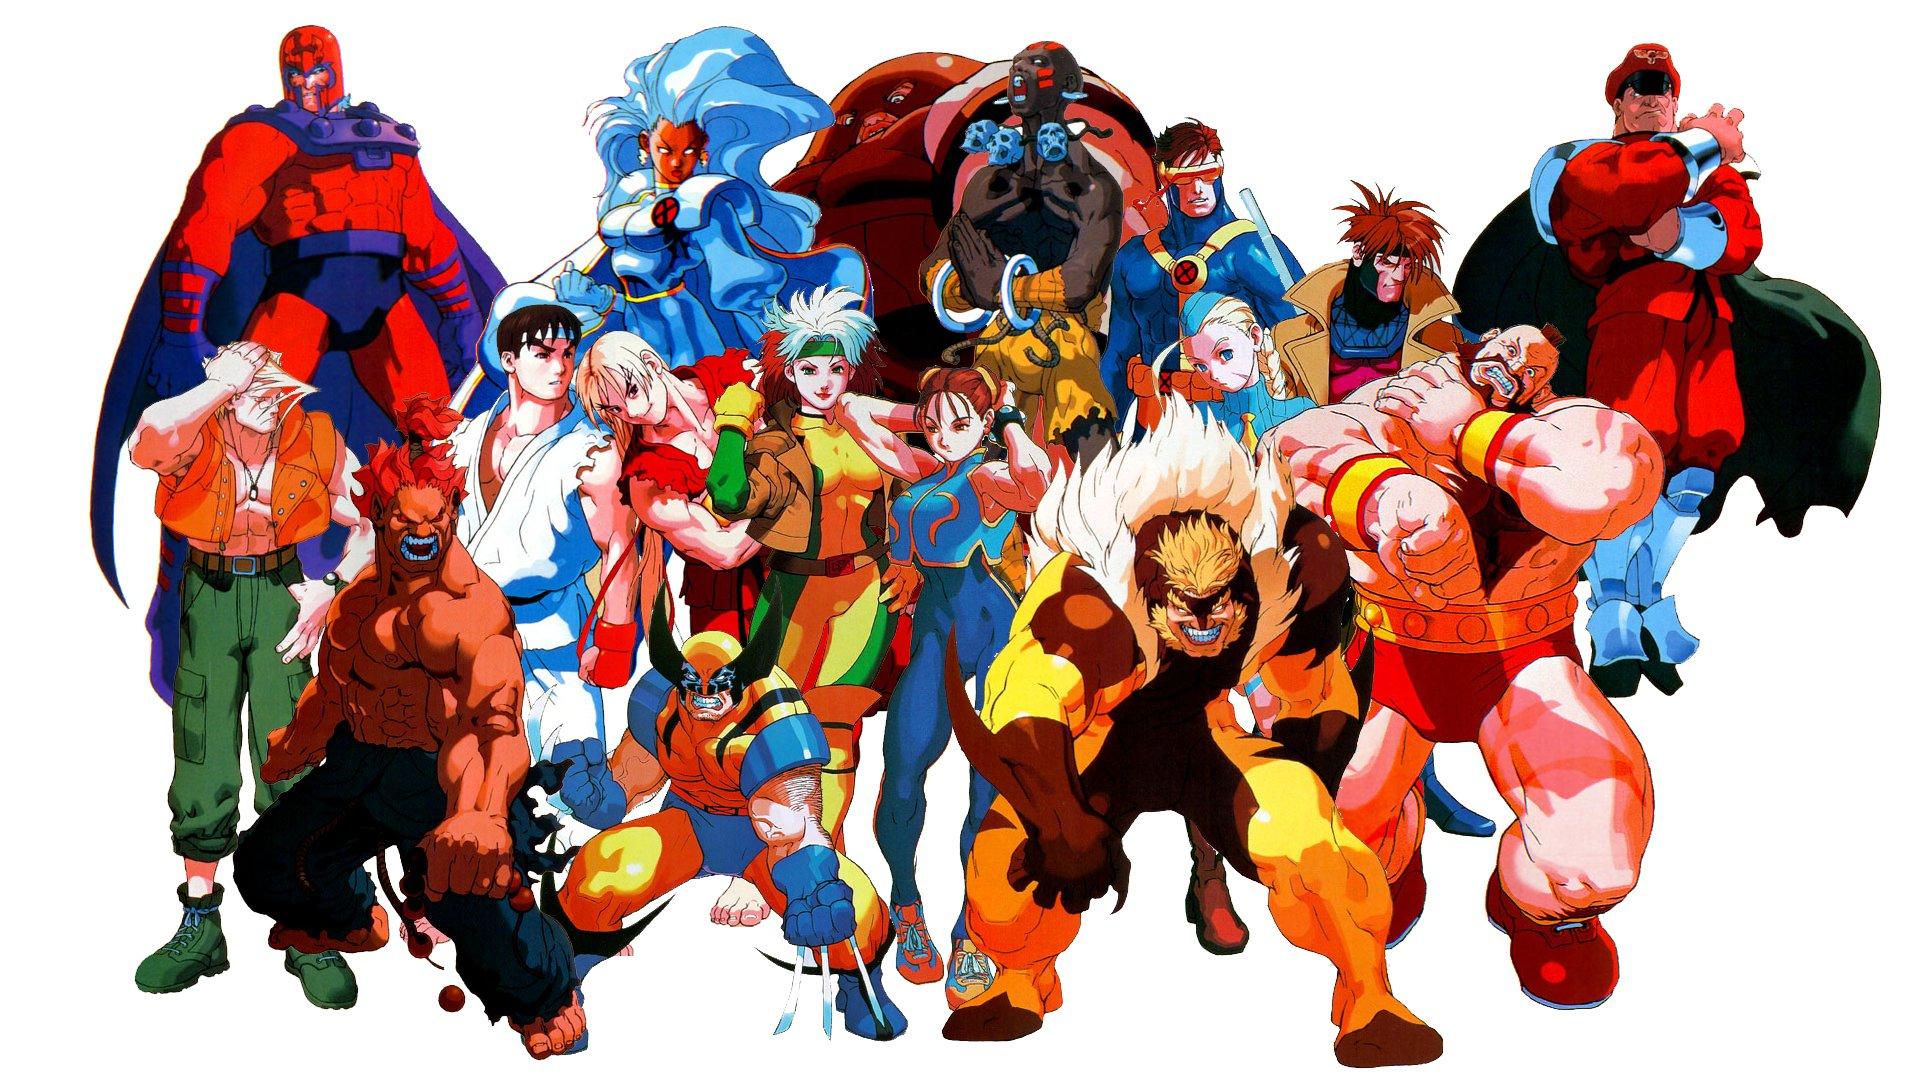 Street fighter 2 wallpapers Gallery